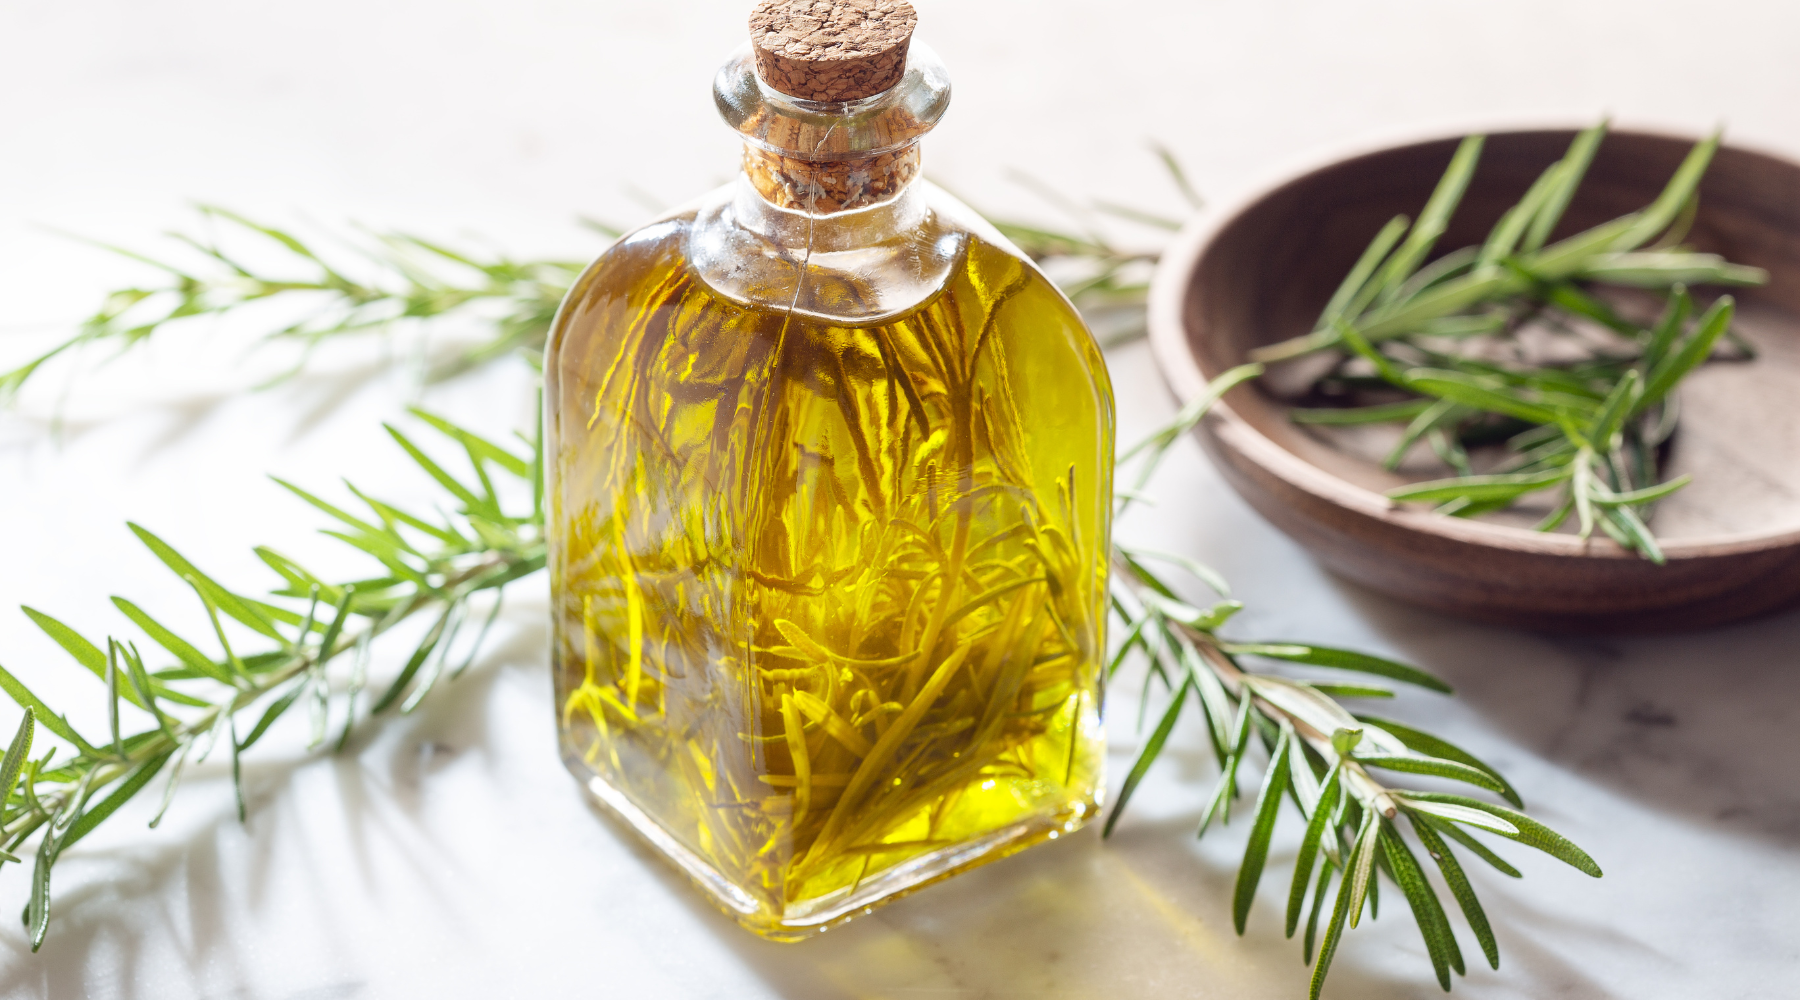 HOW TO CHOOSE THE HEALTHIEST COOKING OILS FOR YOUR KITCHEN